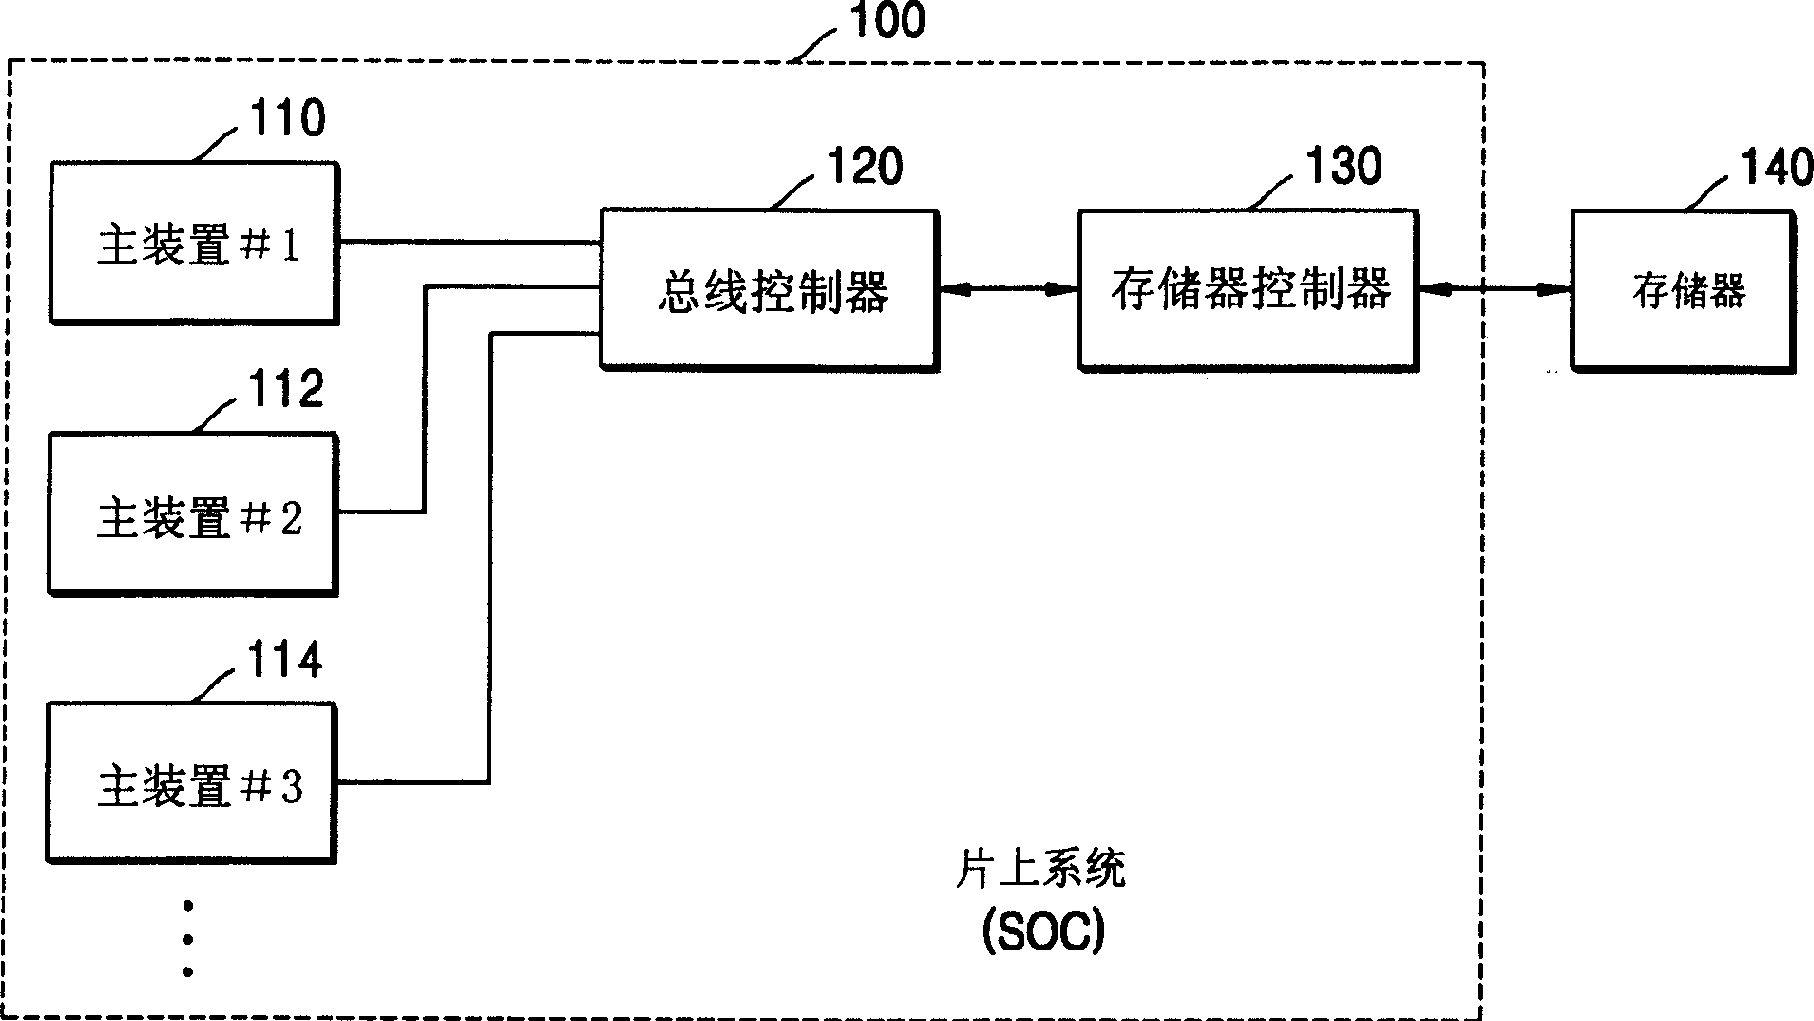 Memory control apparatus and method for scheduling commands